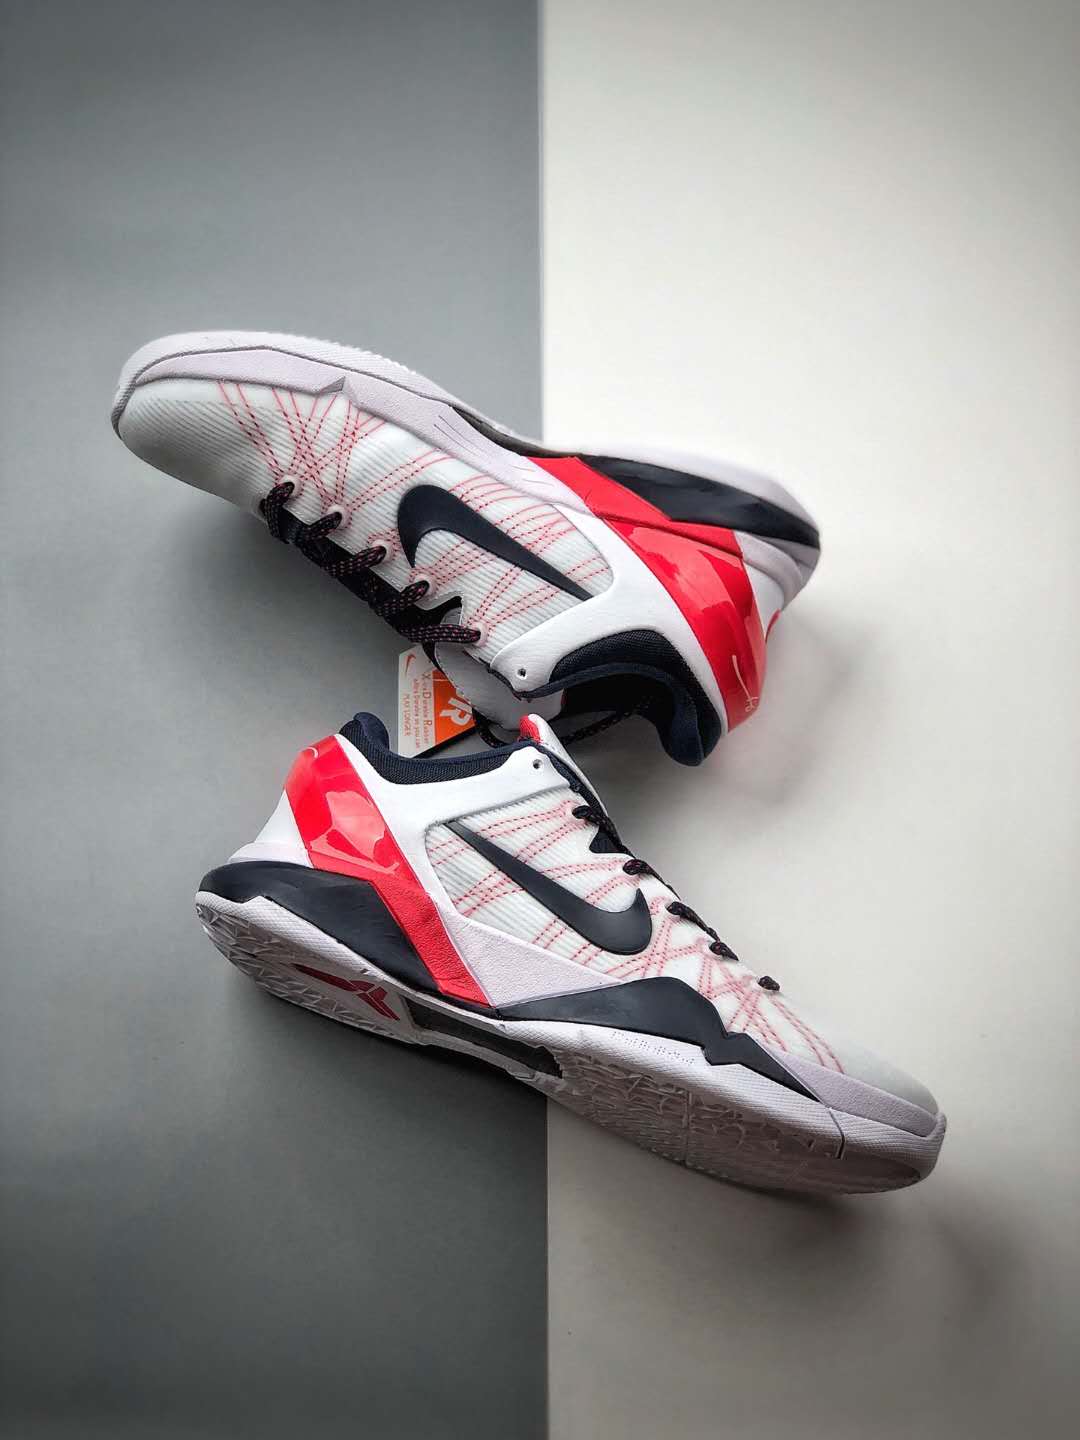 Nike Zoom Kobe 7 System Olympic White Obsidian University Red Pure Platinum 488371-102 - Get the Ultimate Olympic Style!